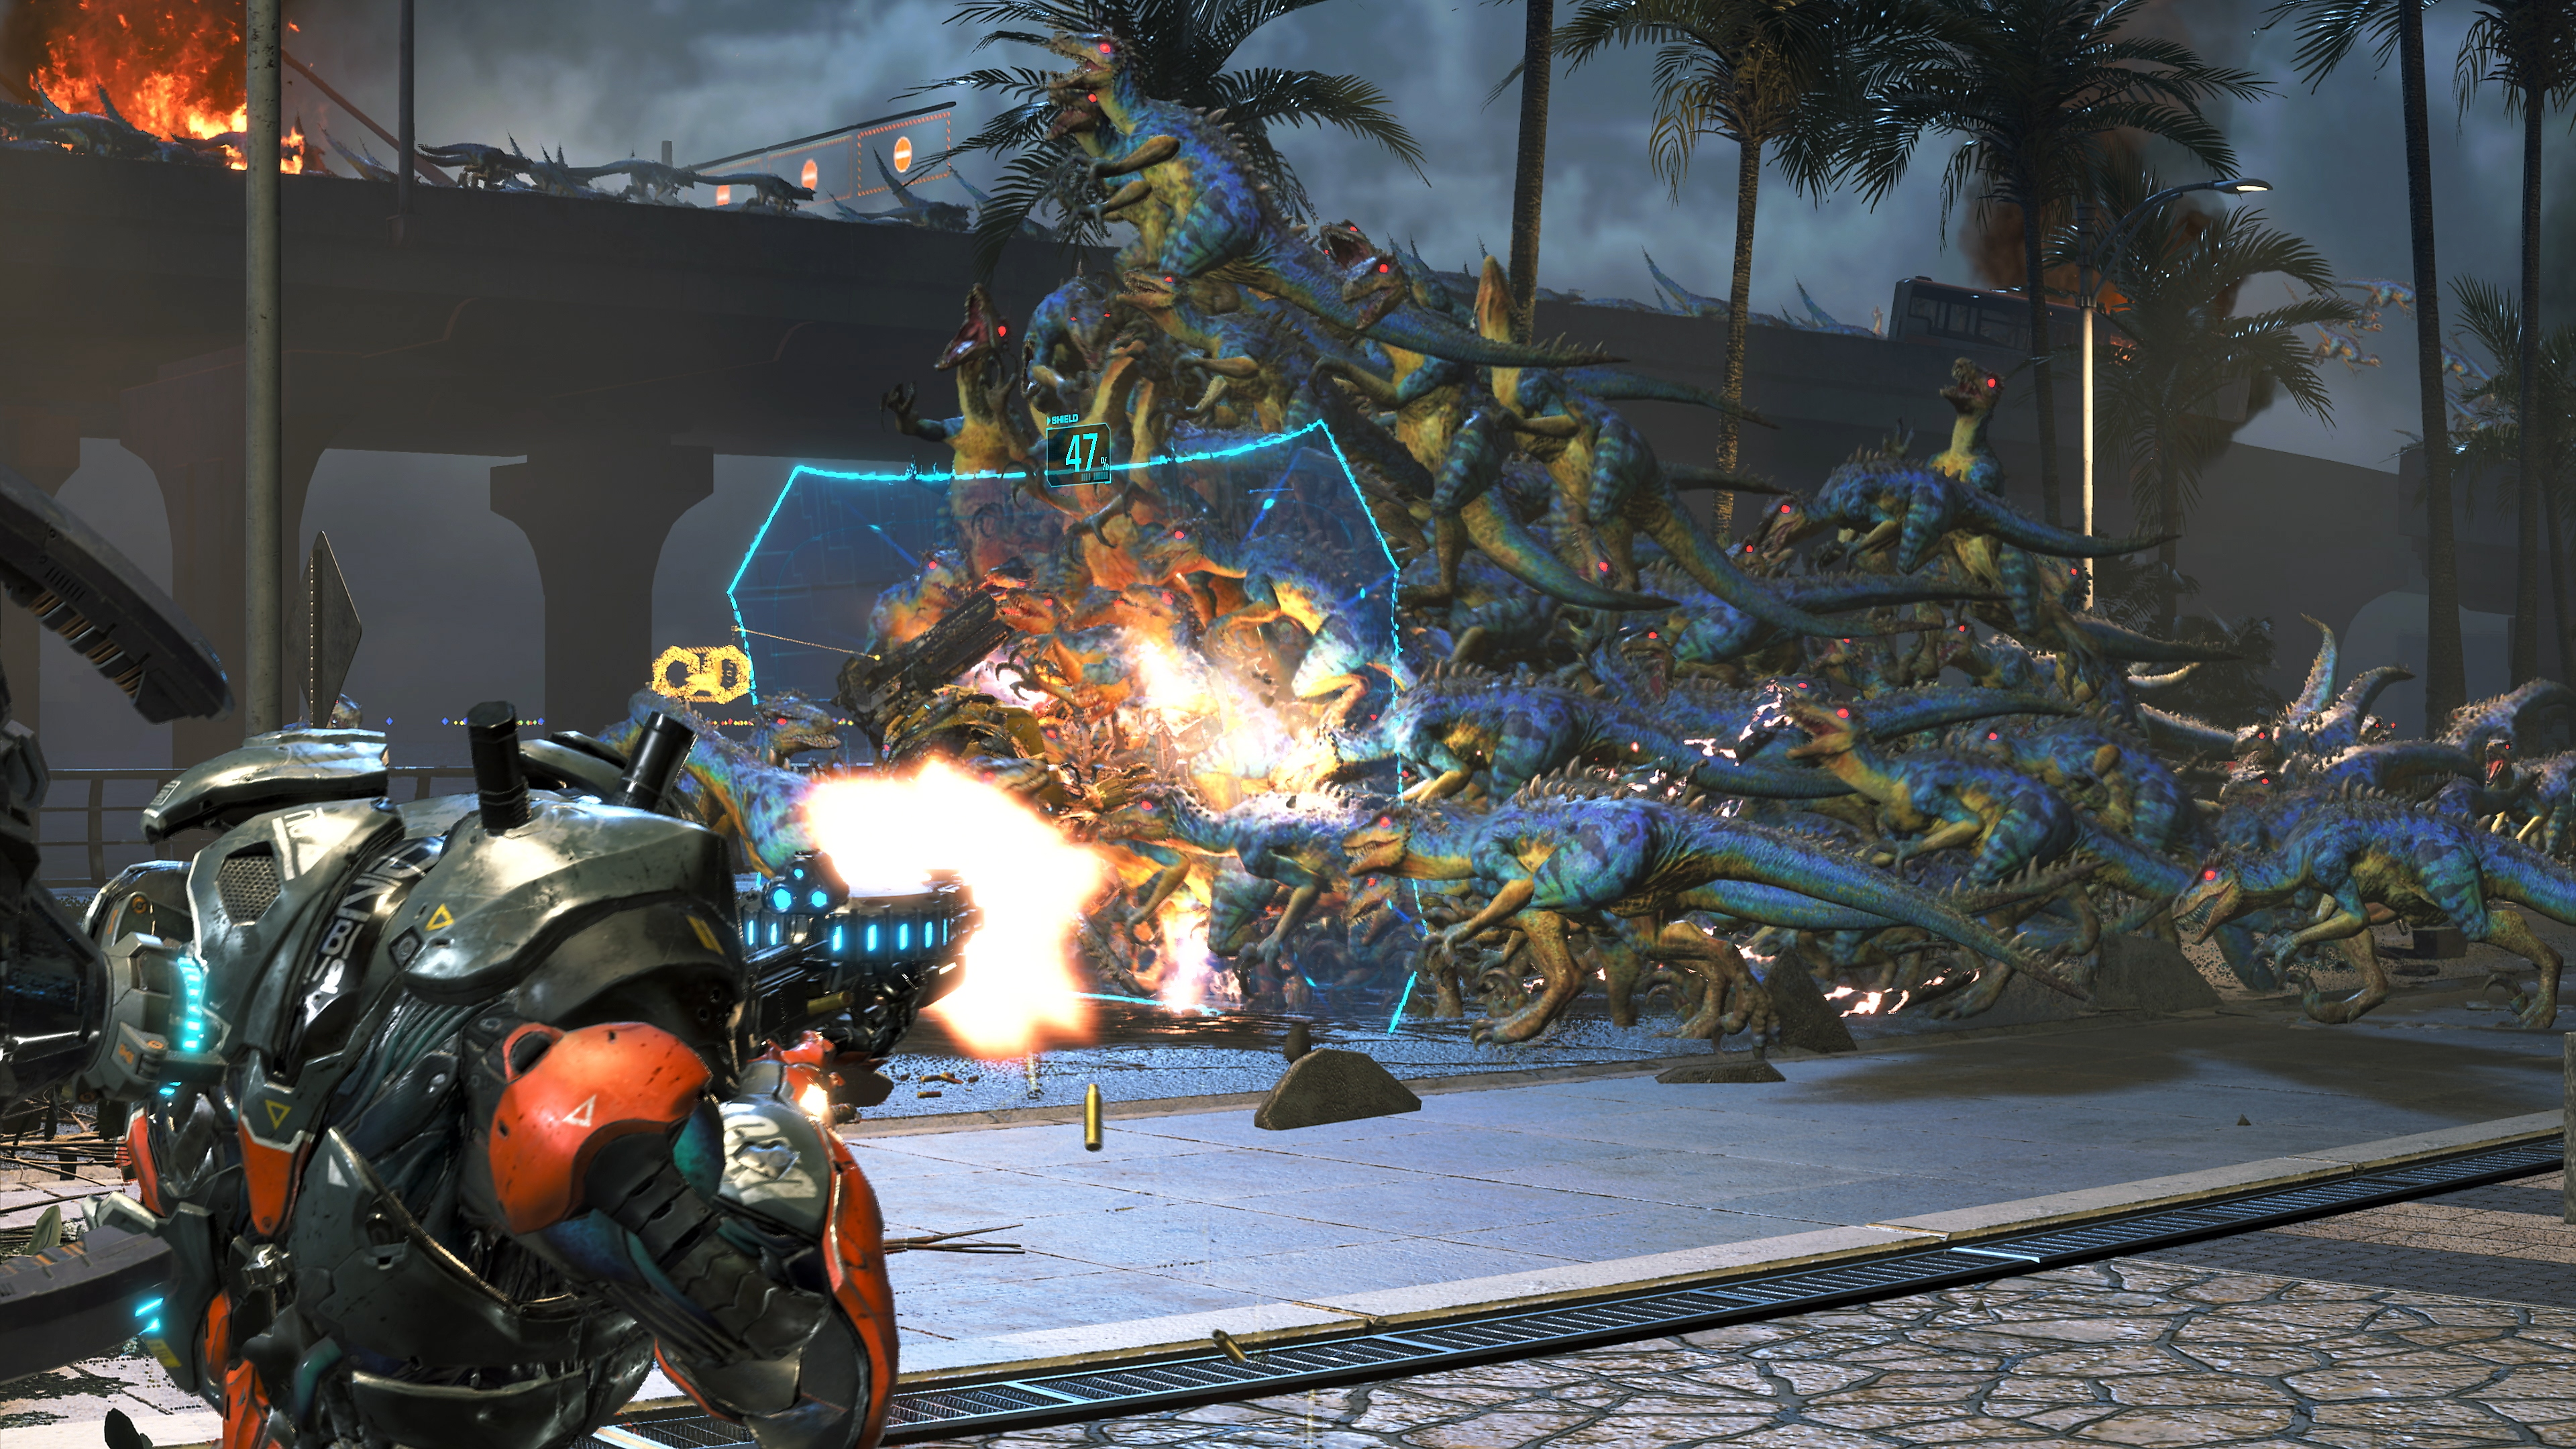 Exoprimal screenshot showing a horde of blue and yellow dinosaurs running at a barrier, while a character is firing weapon towards them